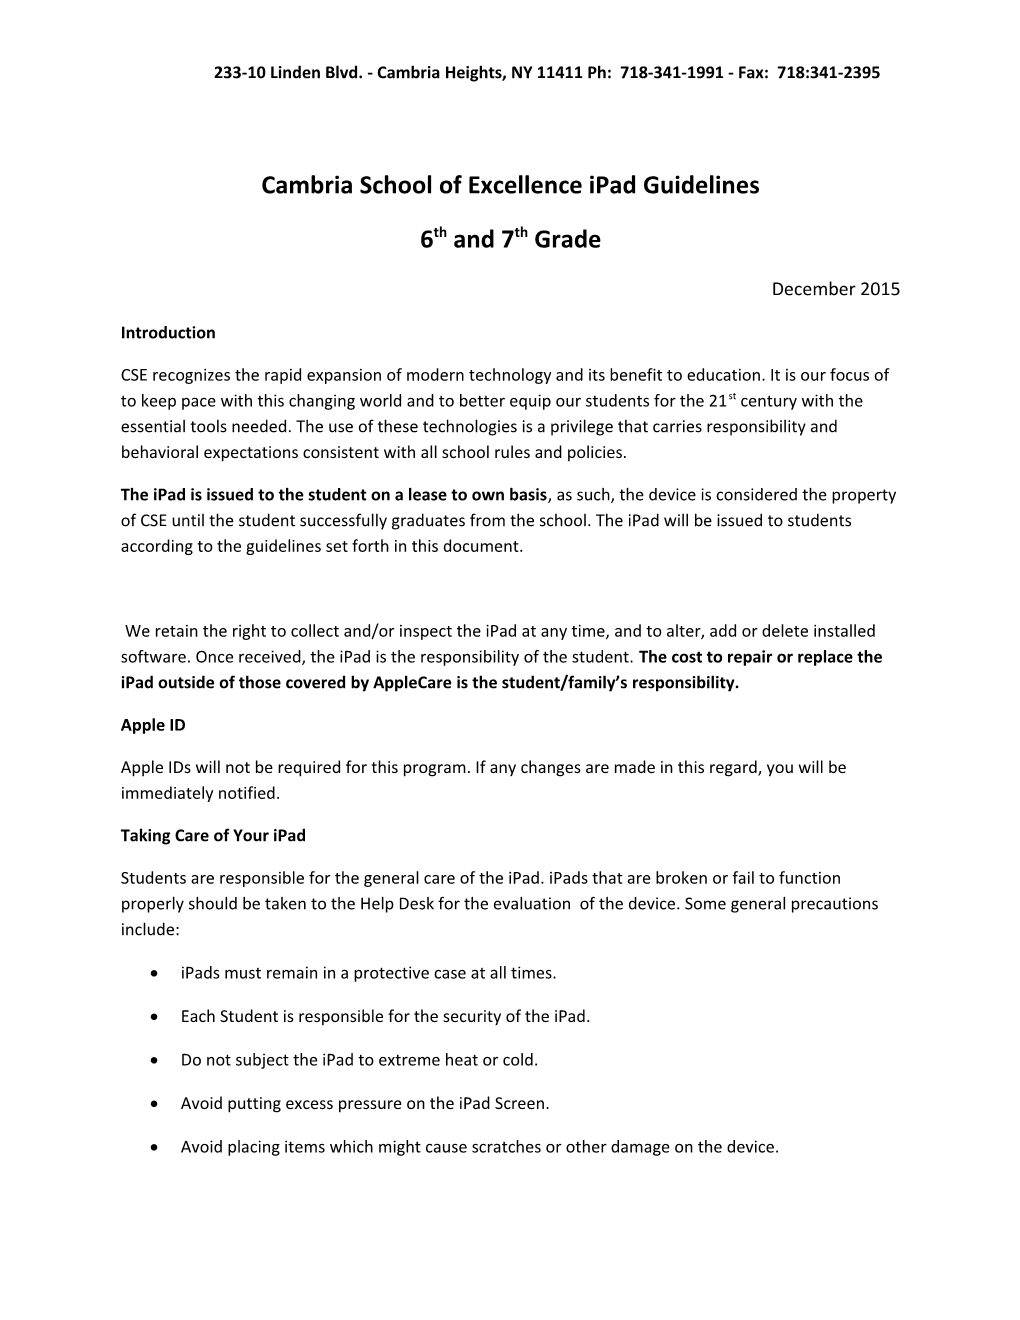 Cambria School of Excellence Ipad Guidelines